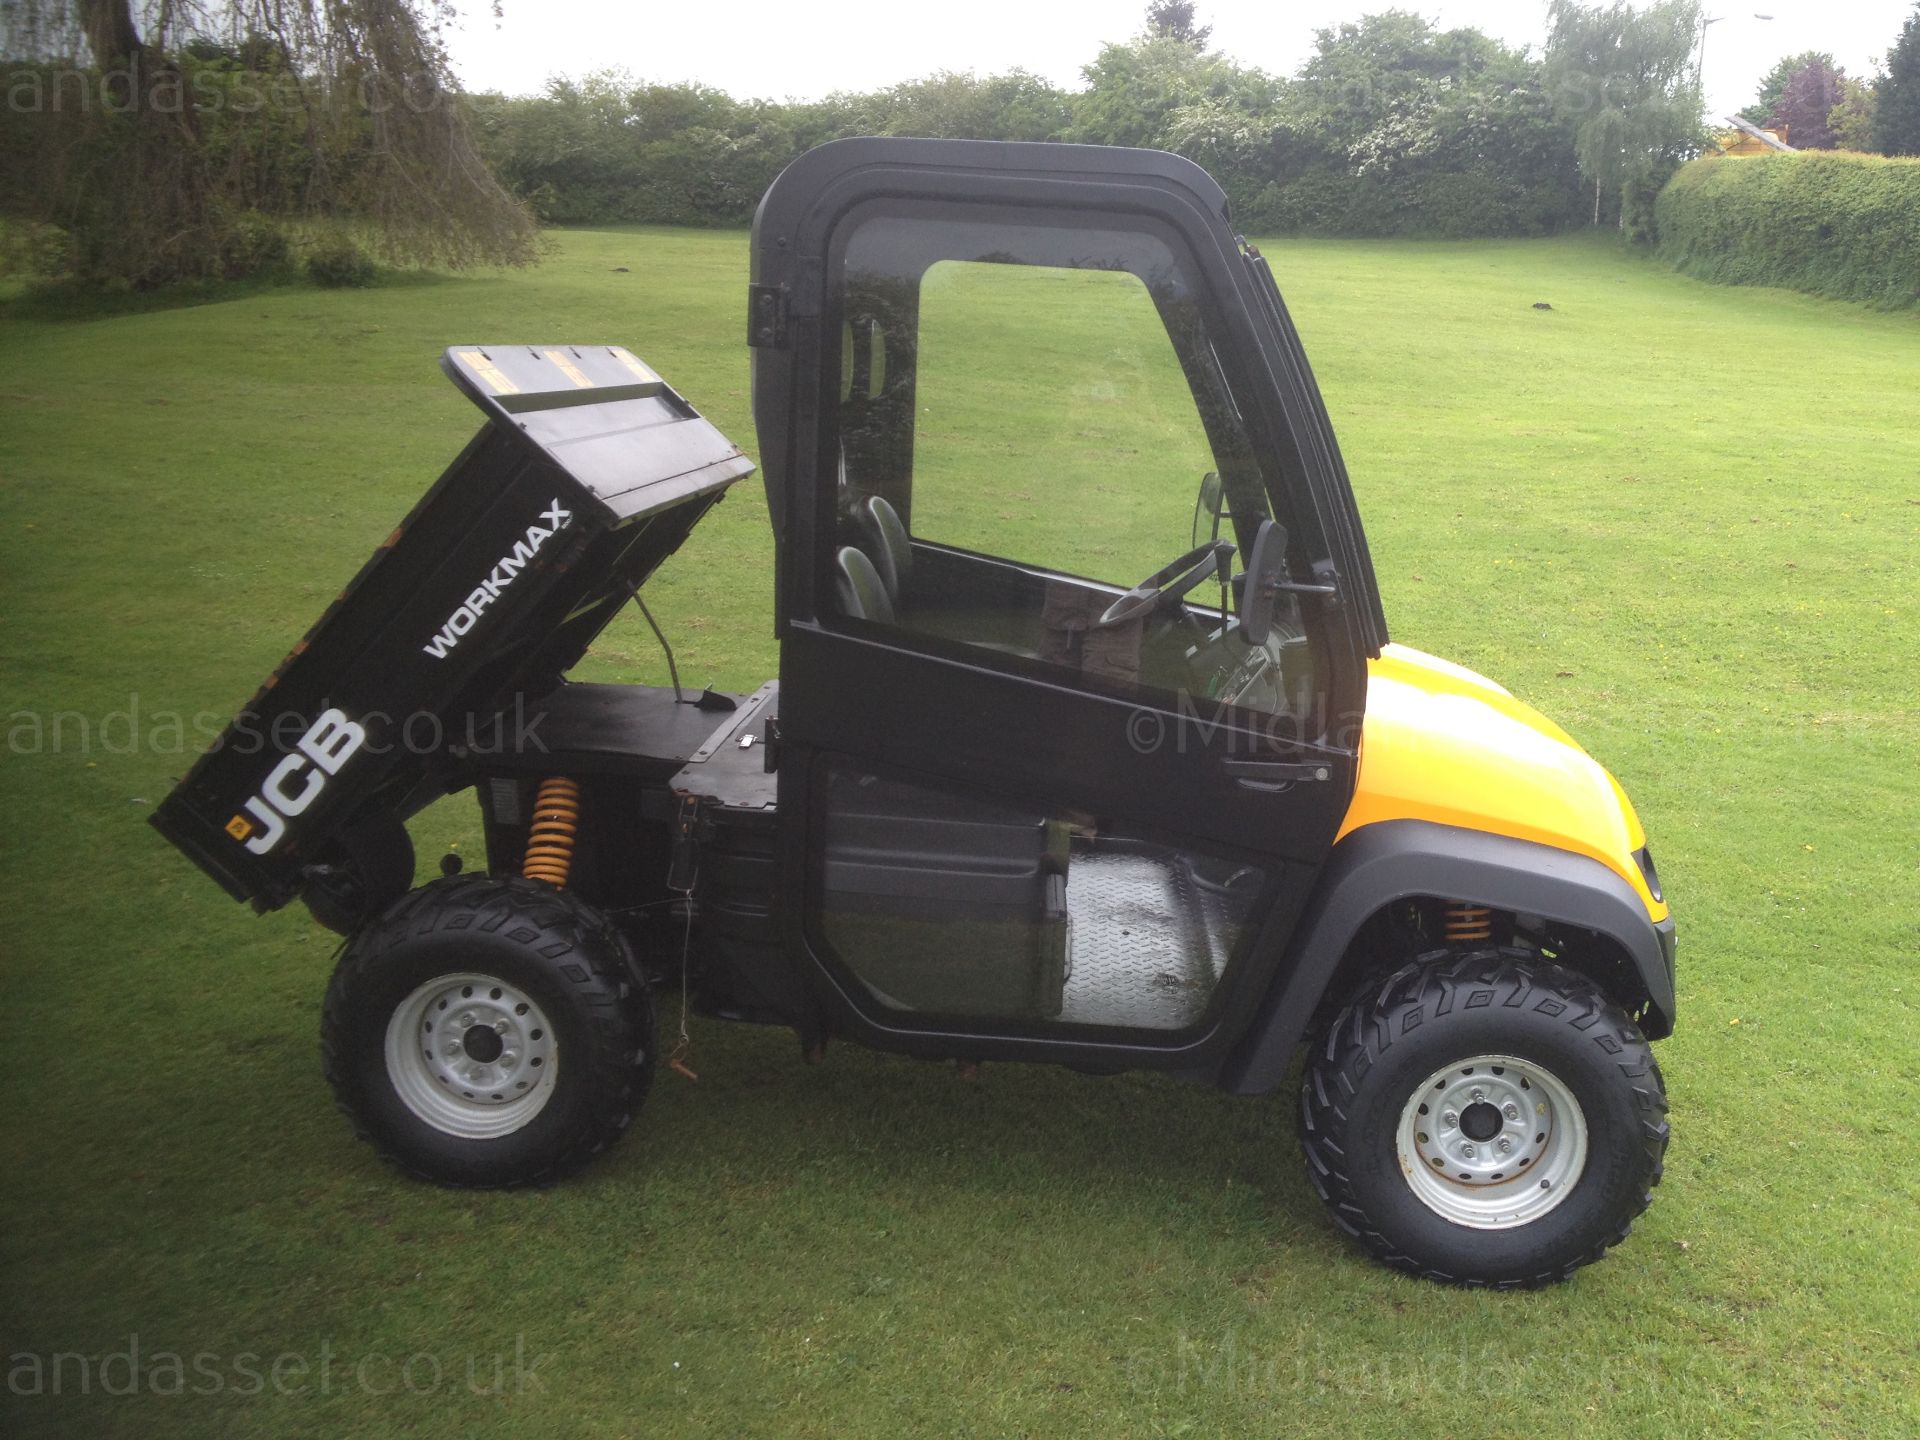 2012 JCB WORKMAX 800D UTILITY VEHICLE - Image 6 of 9